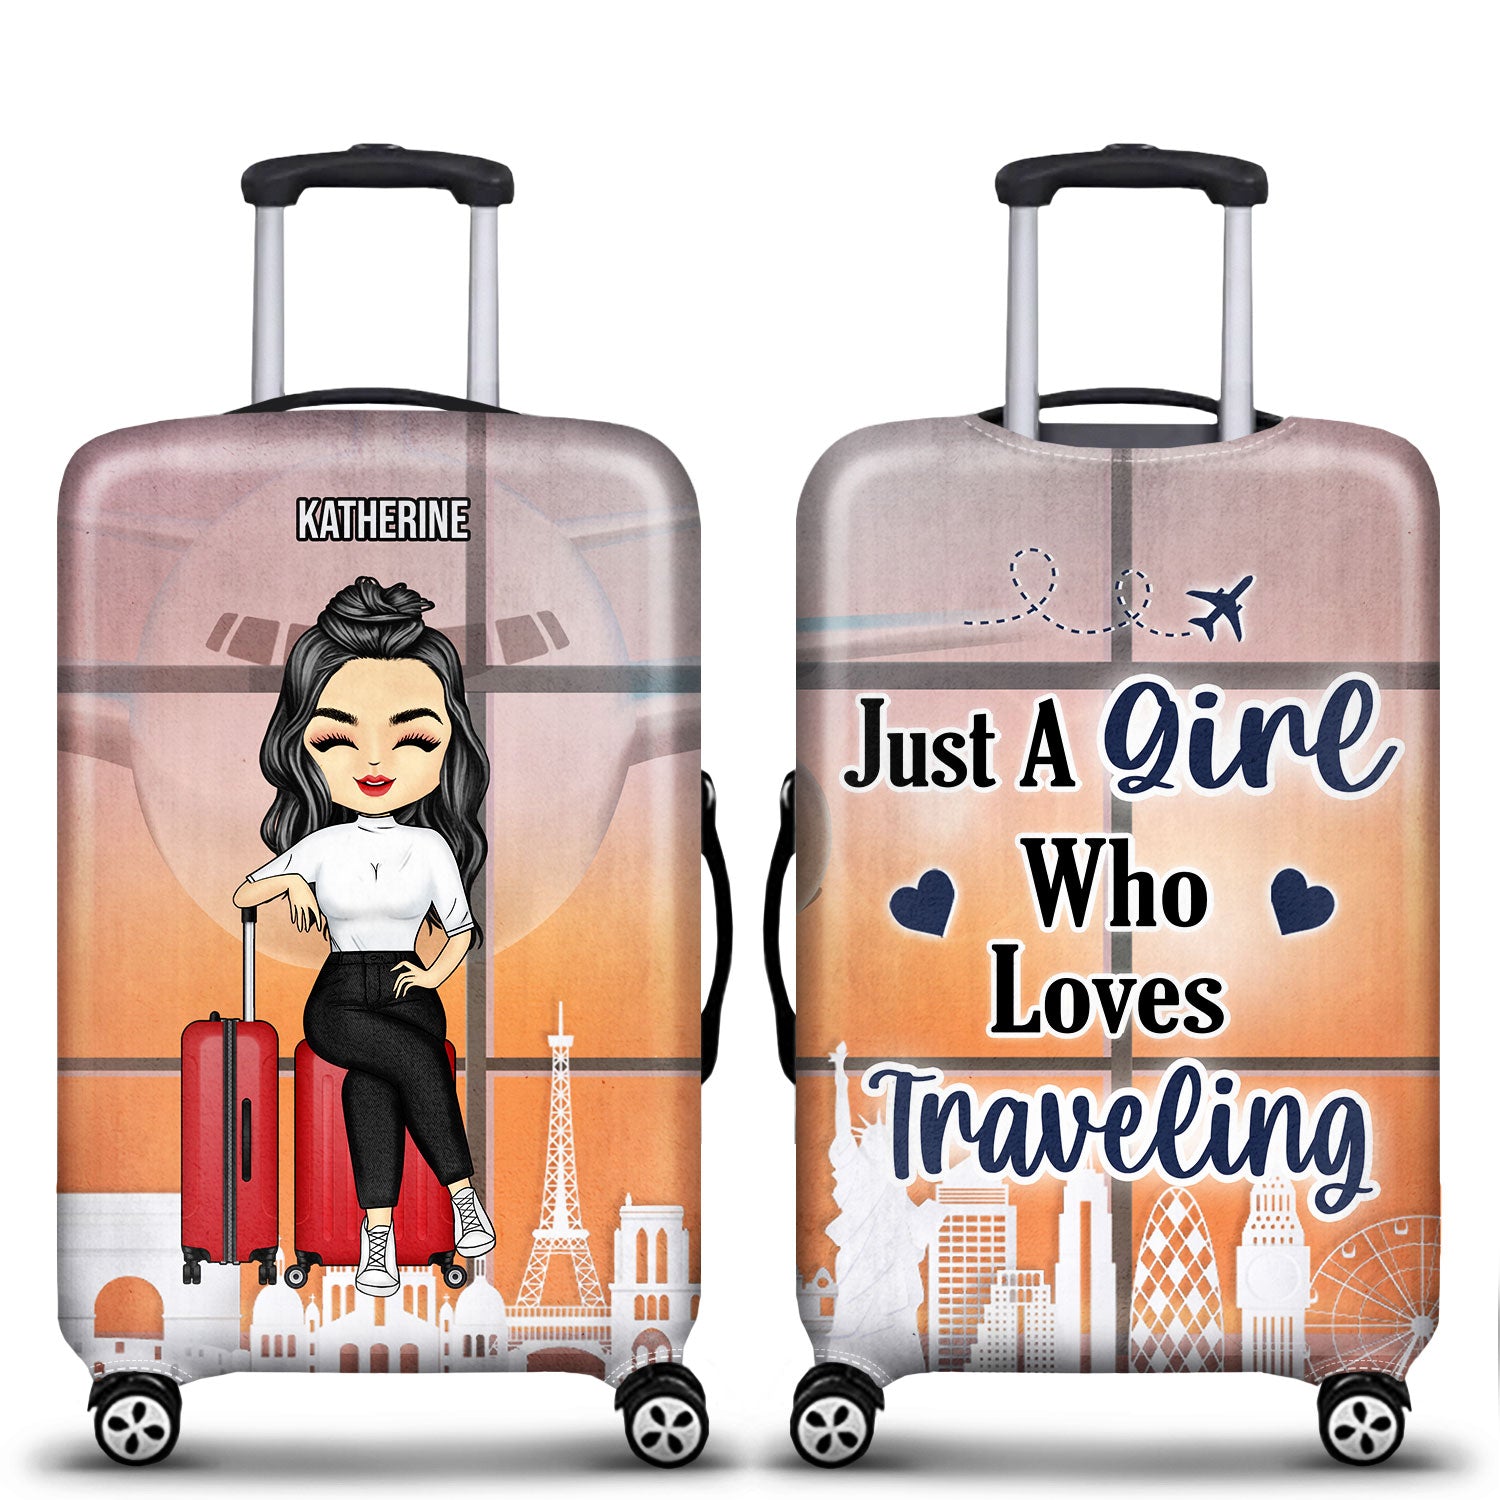 Just A Girl Who Loves Traveling - Gift For Travel Lovers - Personalized Custom Luggage Cover